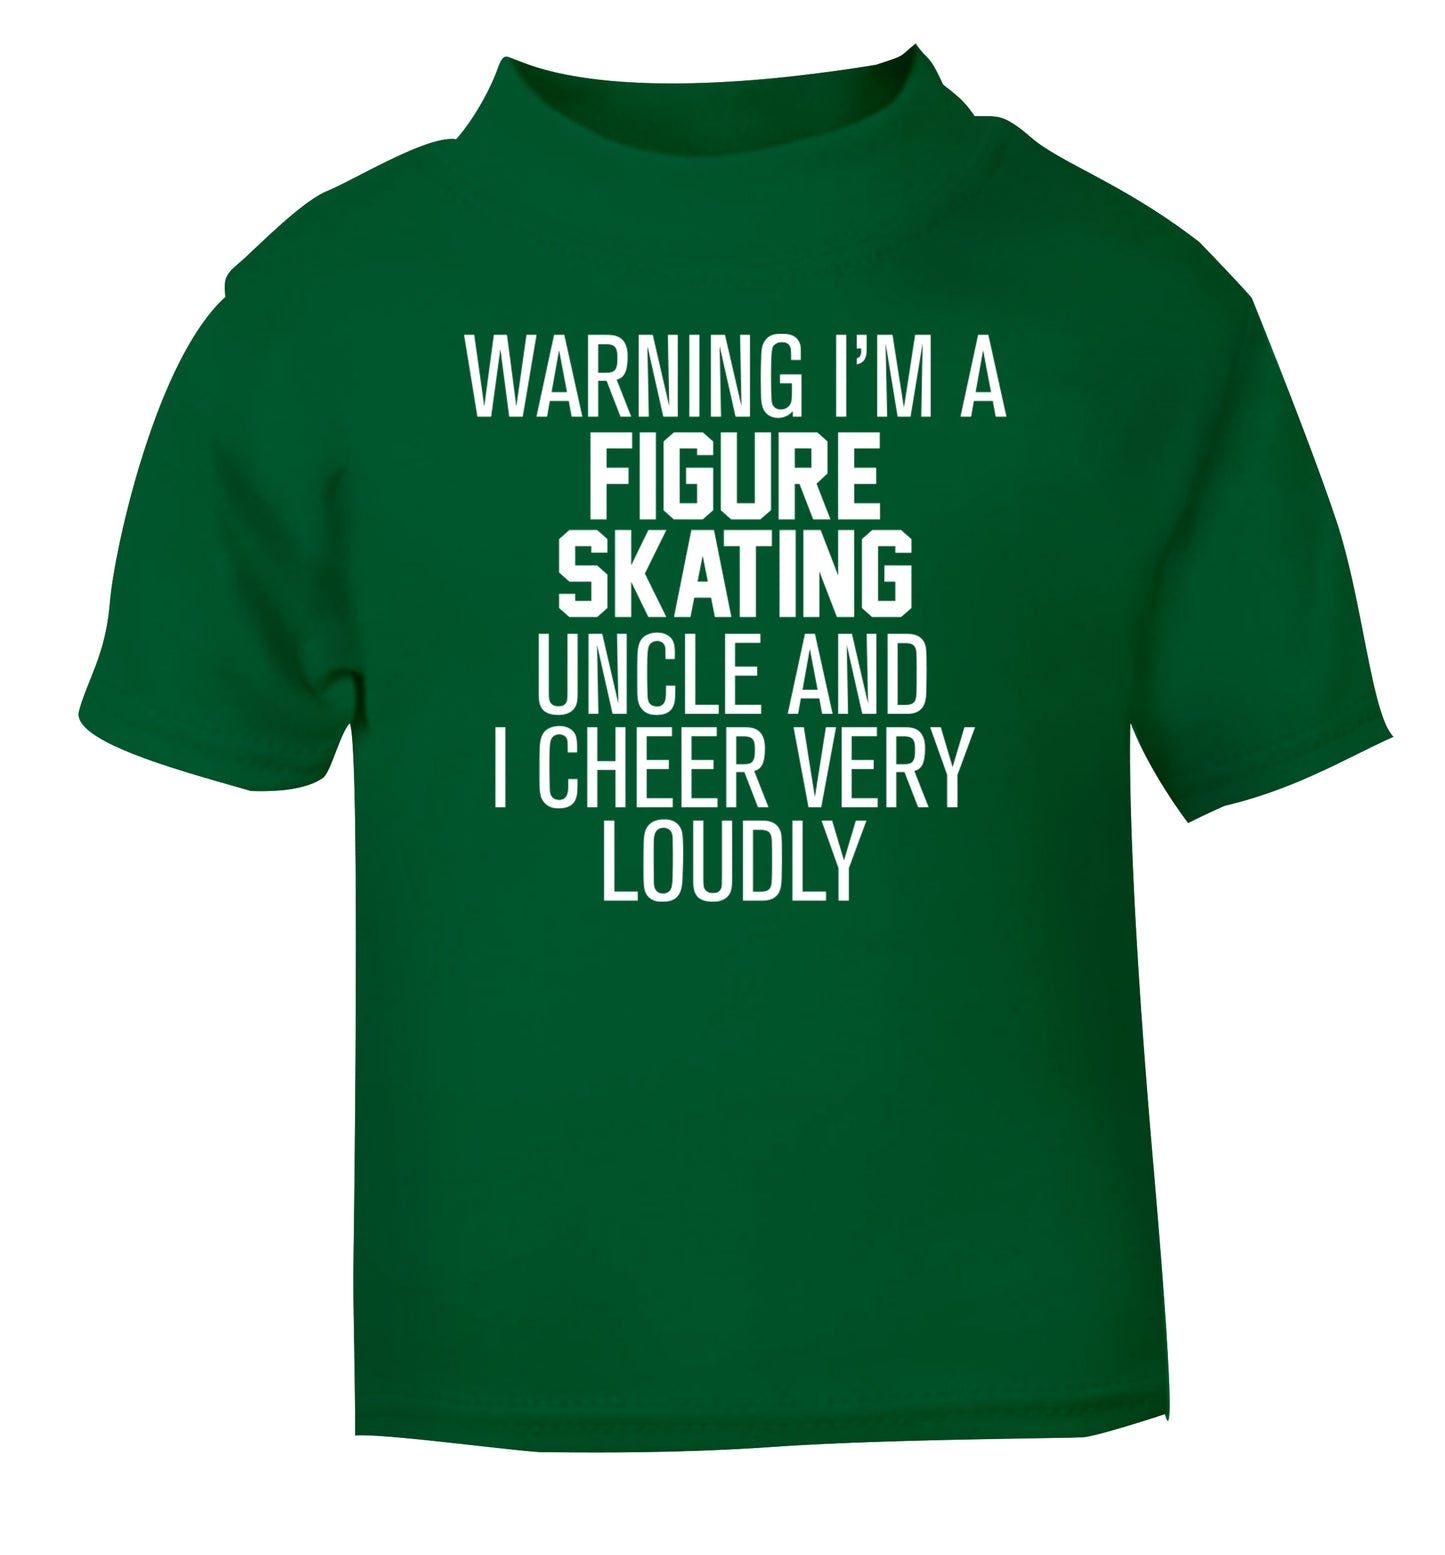 Warning I'm a figure skating uncle and I cheer very loudly green Baby Toddler Tshirt 2 Years